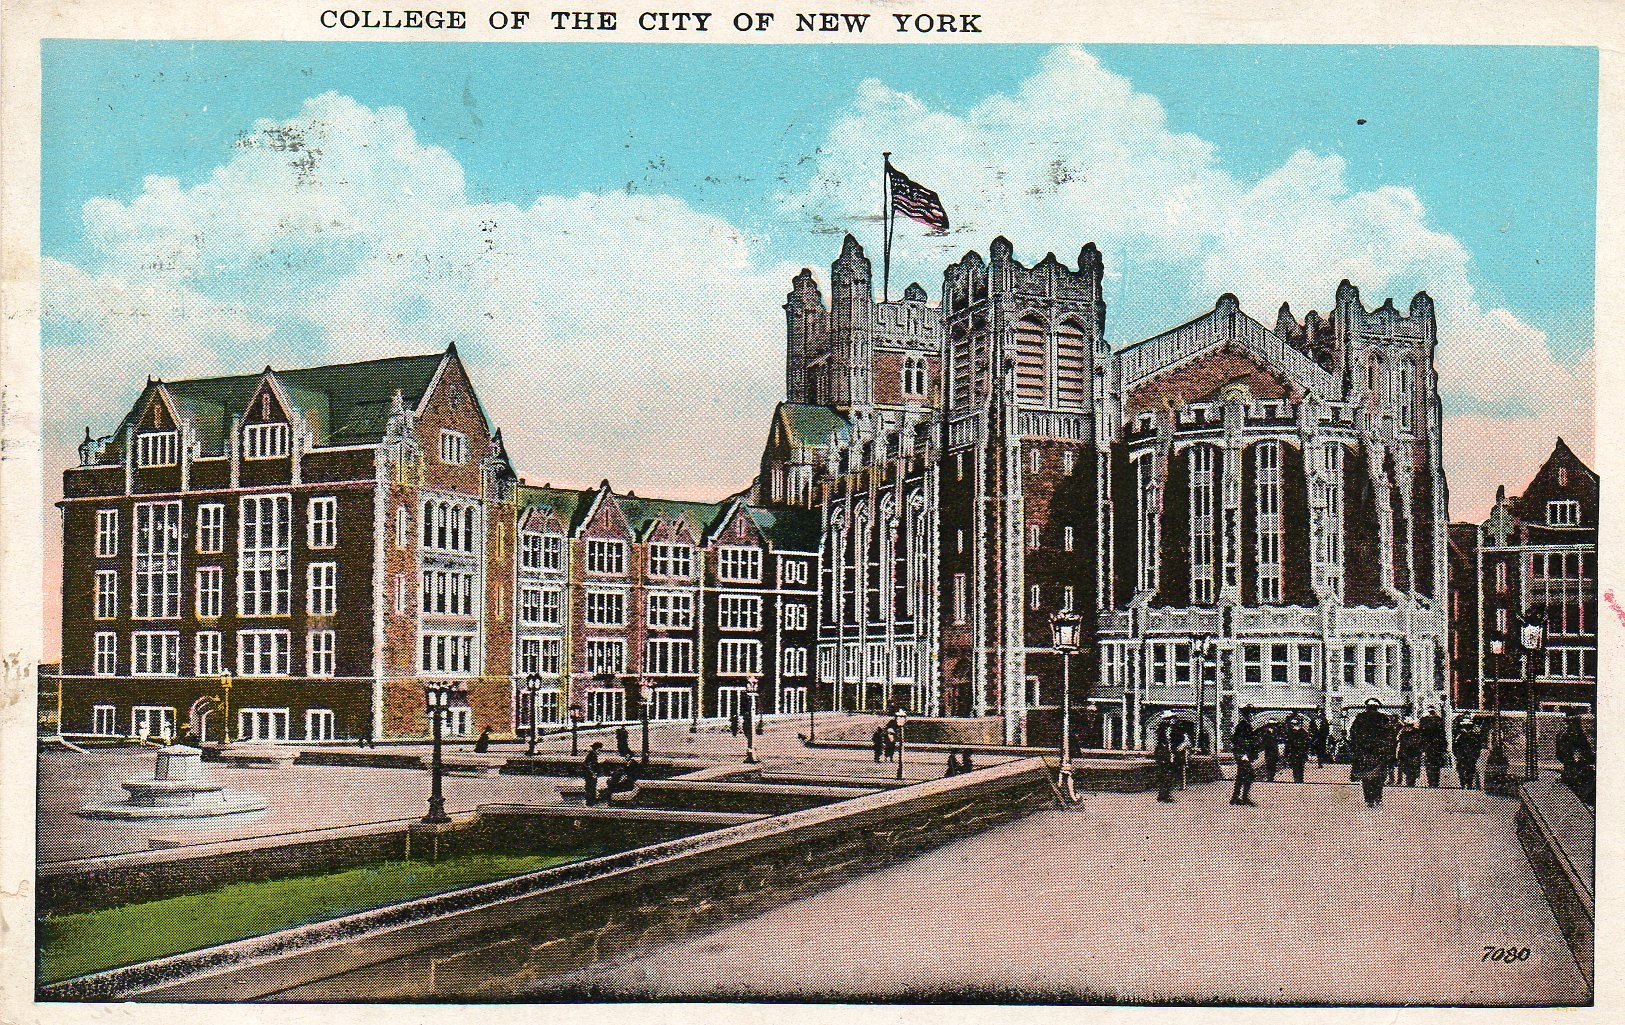 The City College Of New York